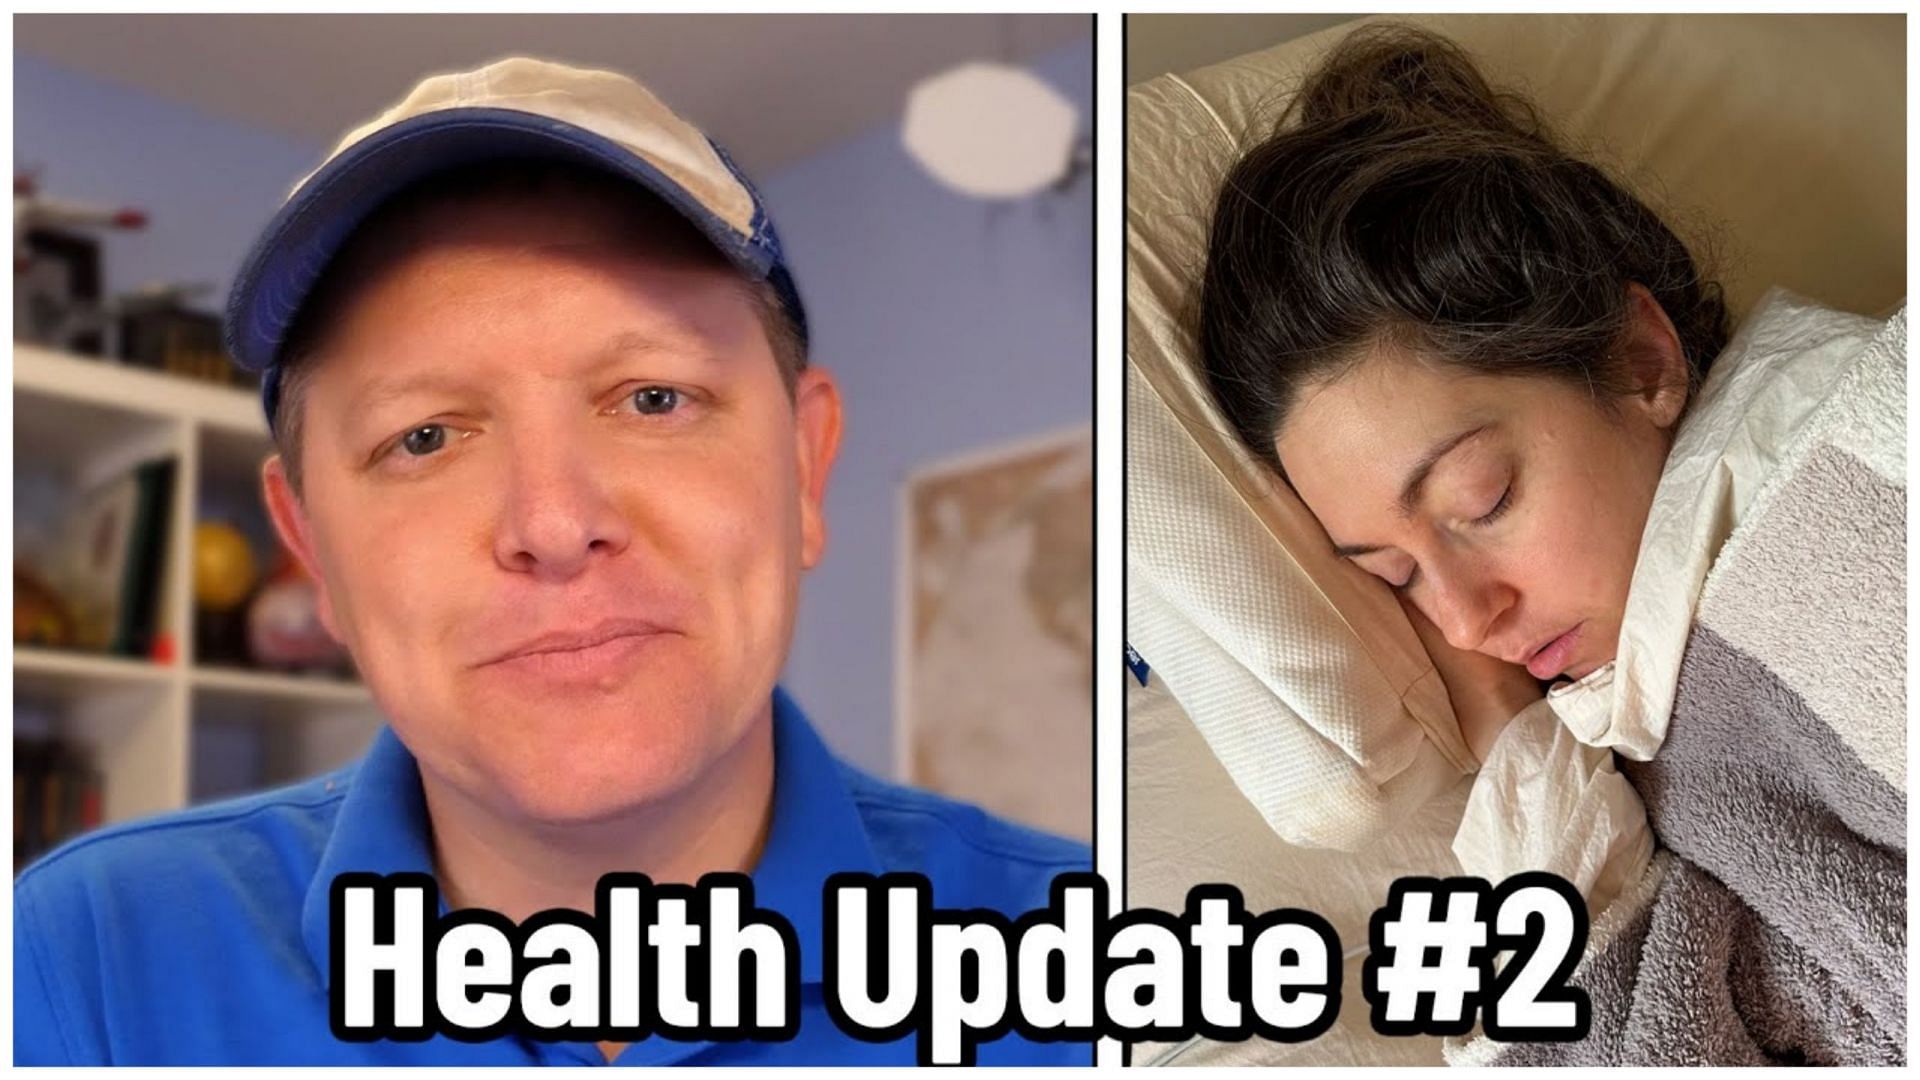 Physics Girl Health Update (Image via Youtube Channel)